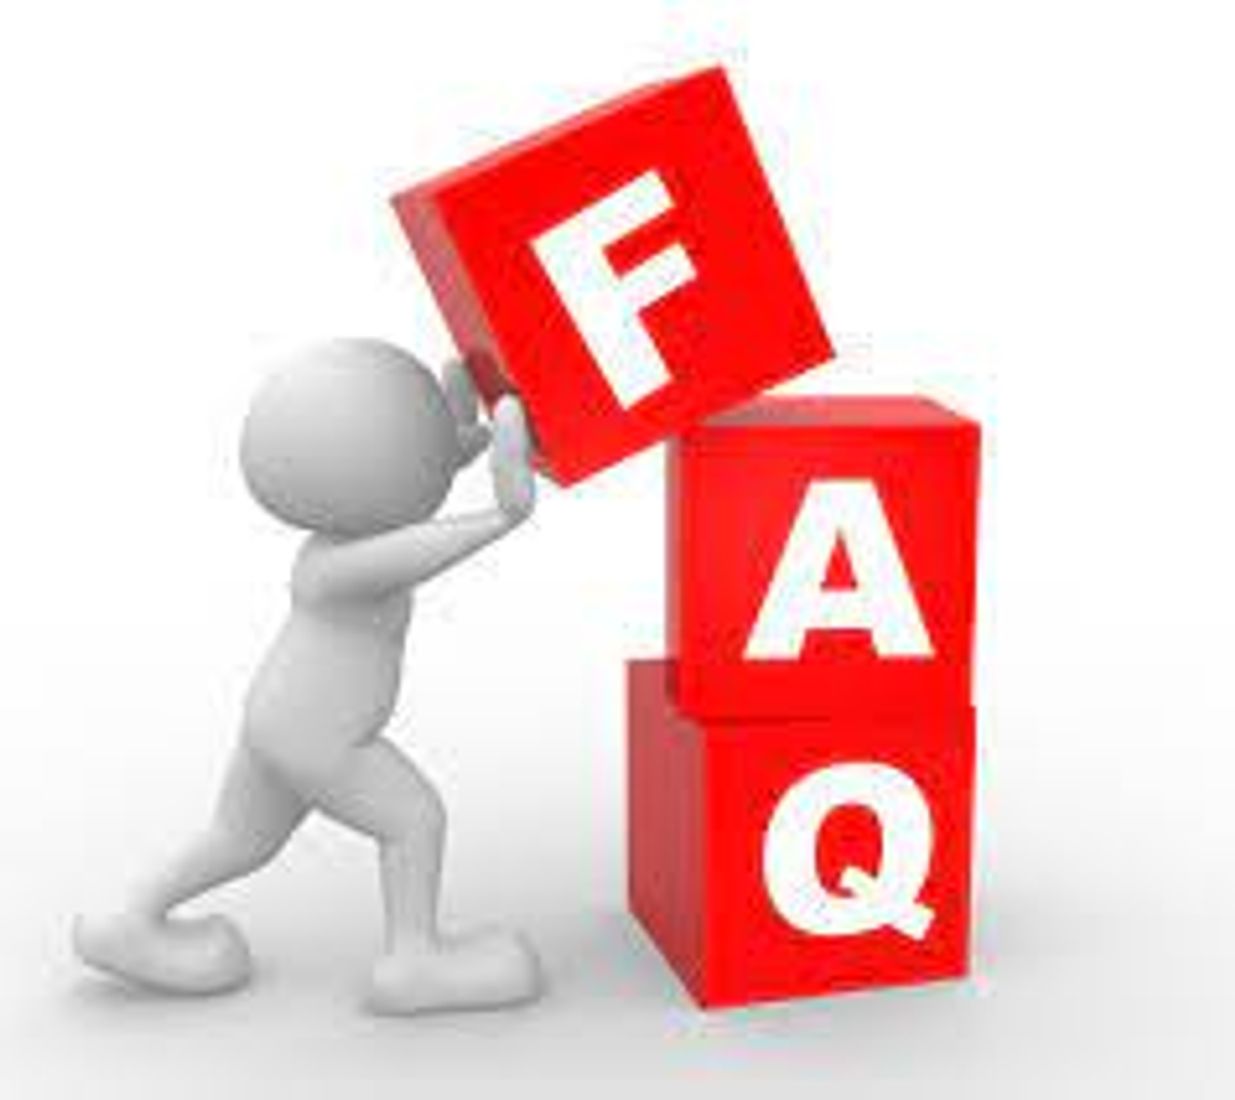 Frequently Asked Questions (FAQs) on Recruitment Process by RRB